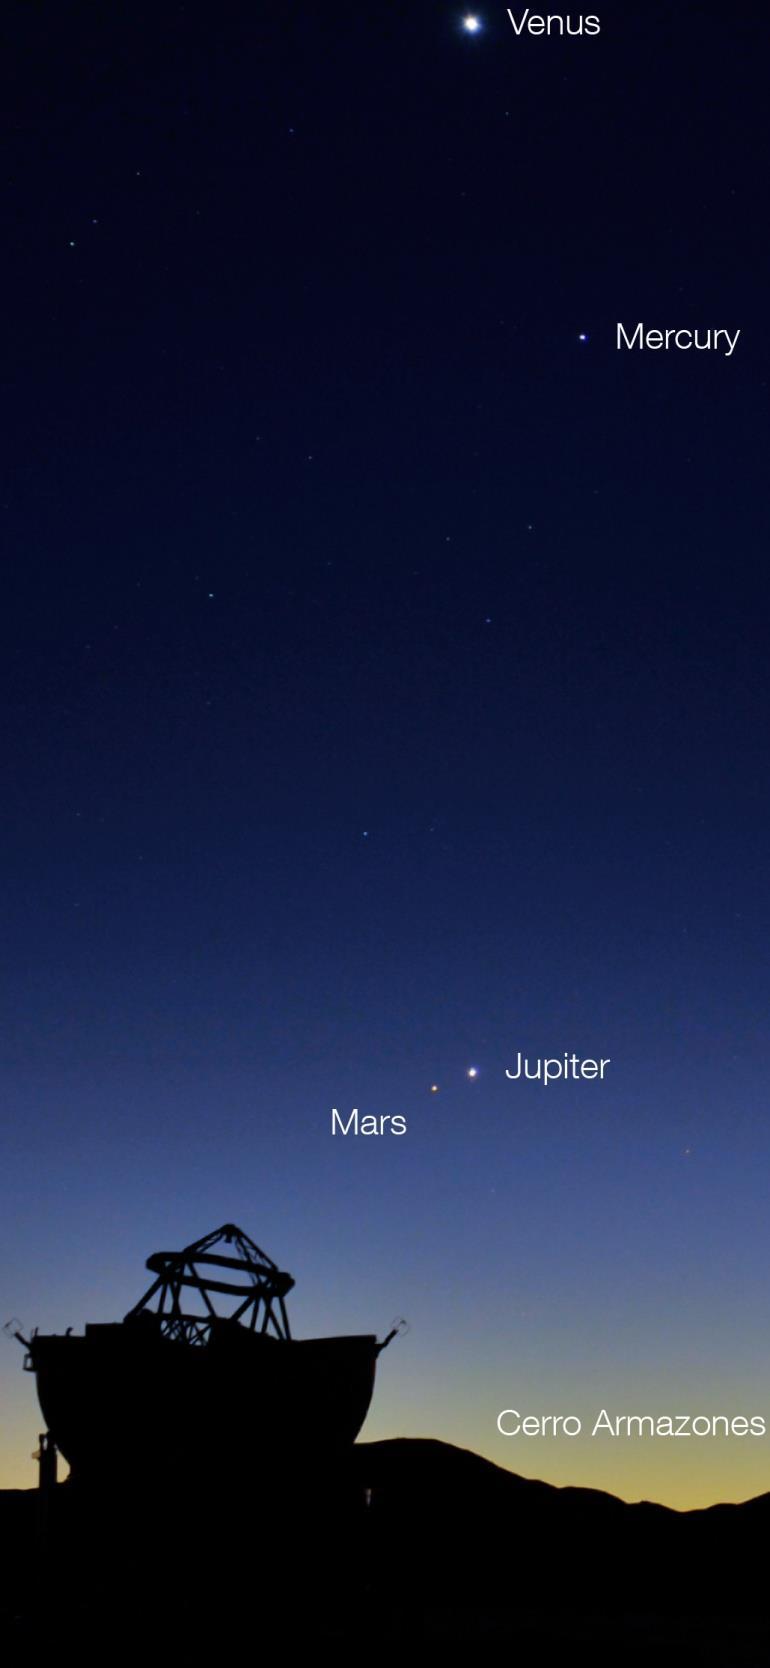 Jupiter: Naked-Eye Viewing Jupiter is the second brightest planet, after Venus in the night sky.